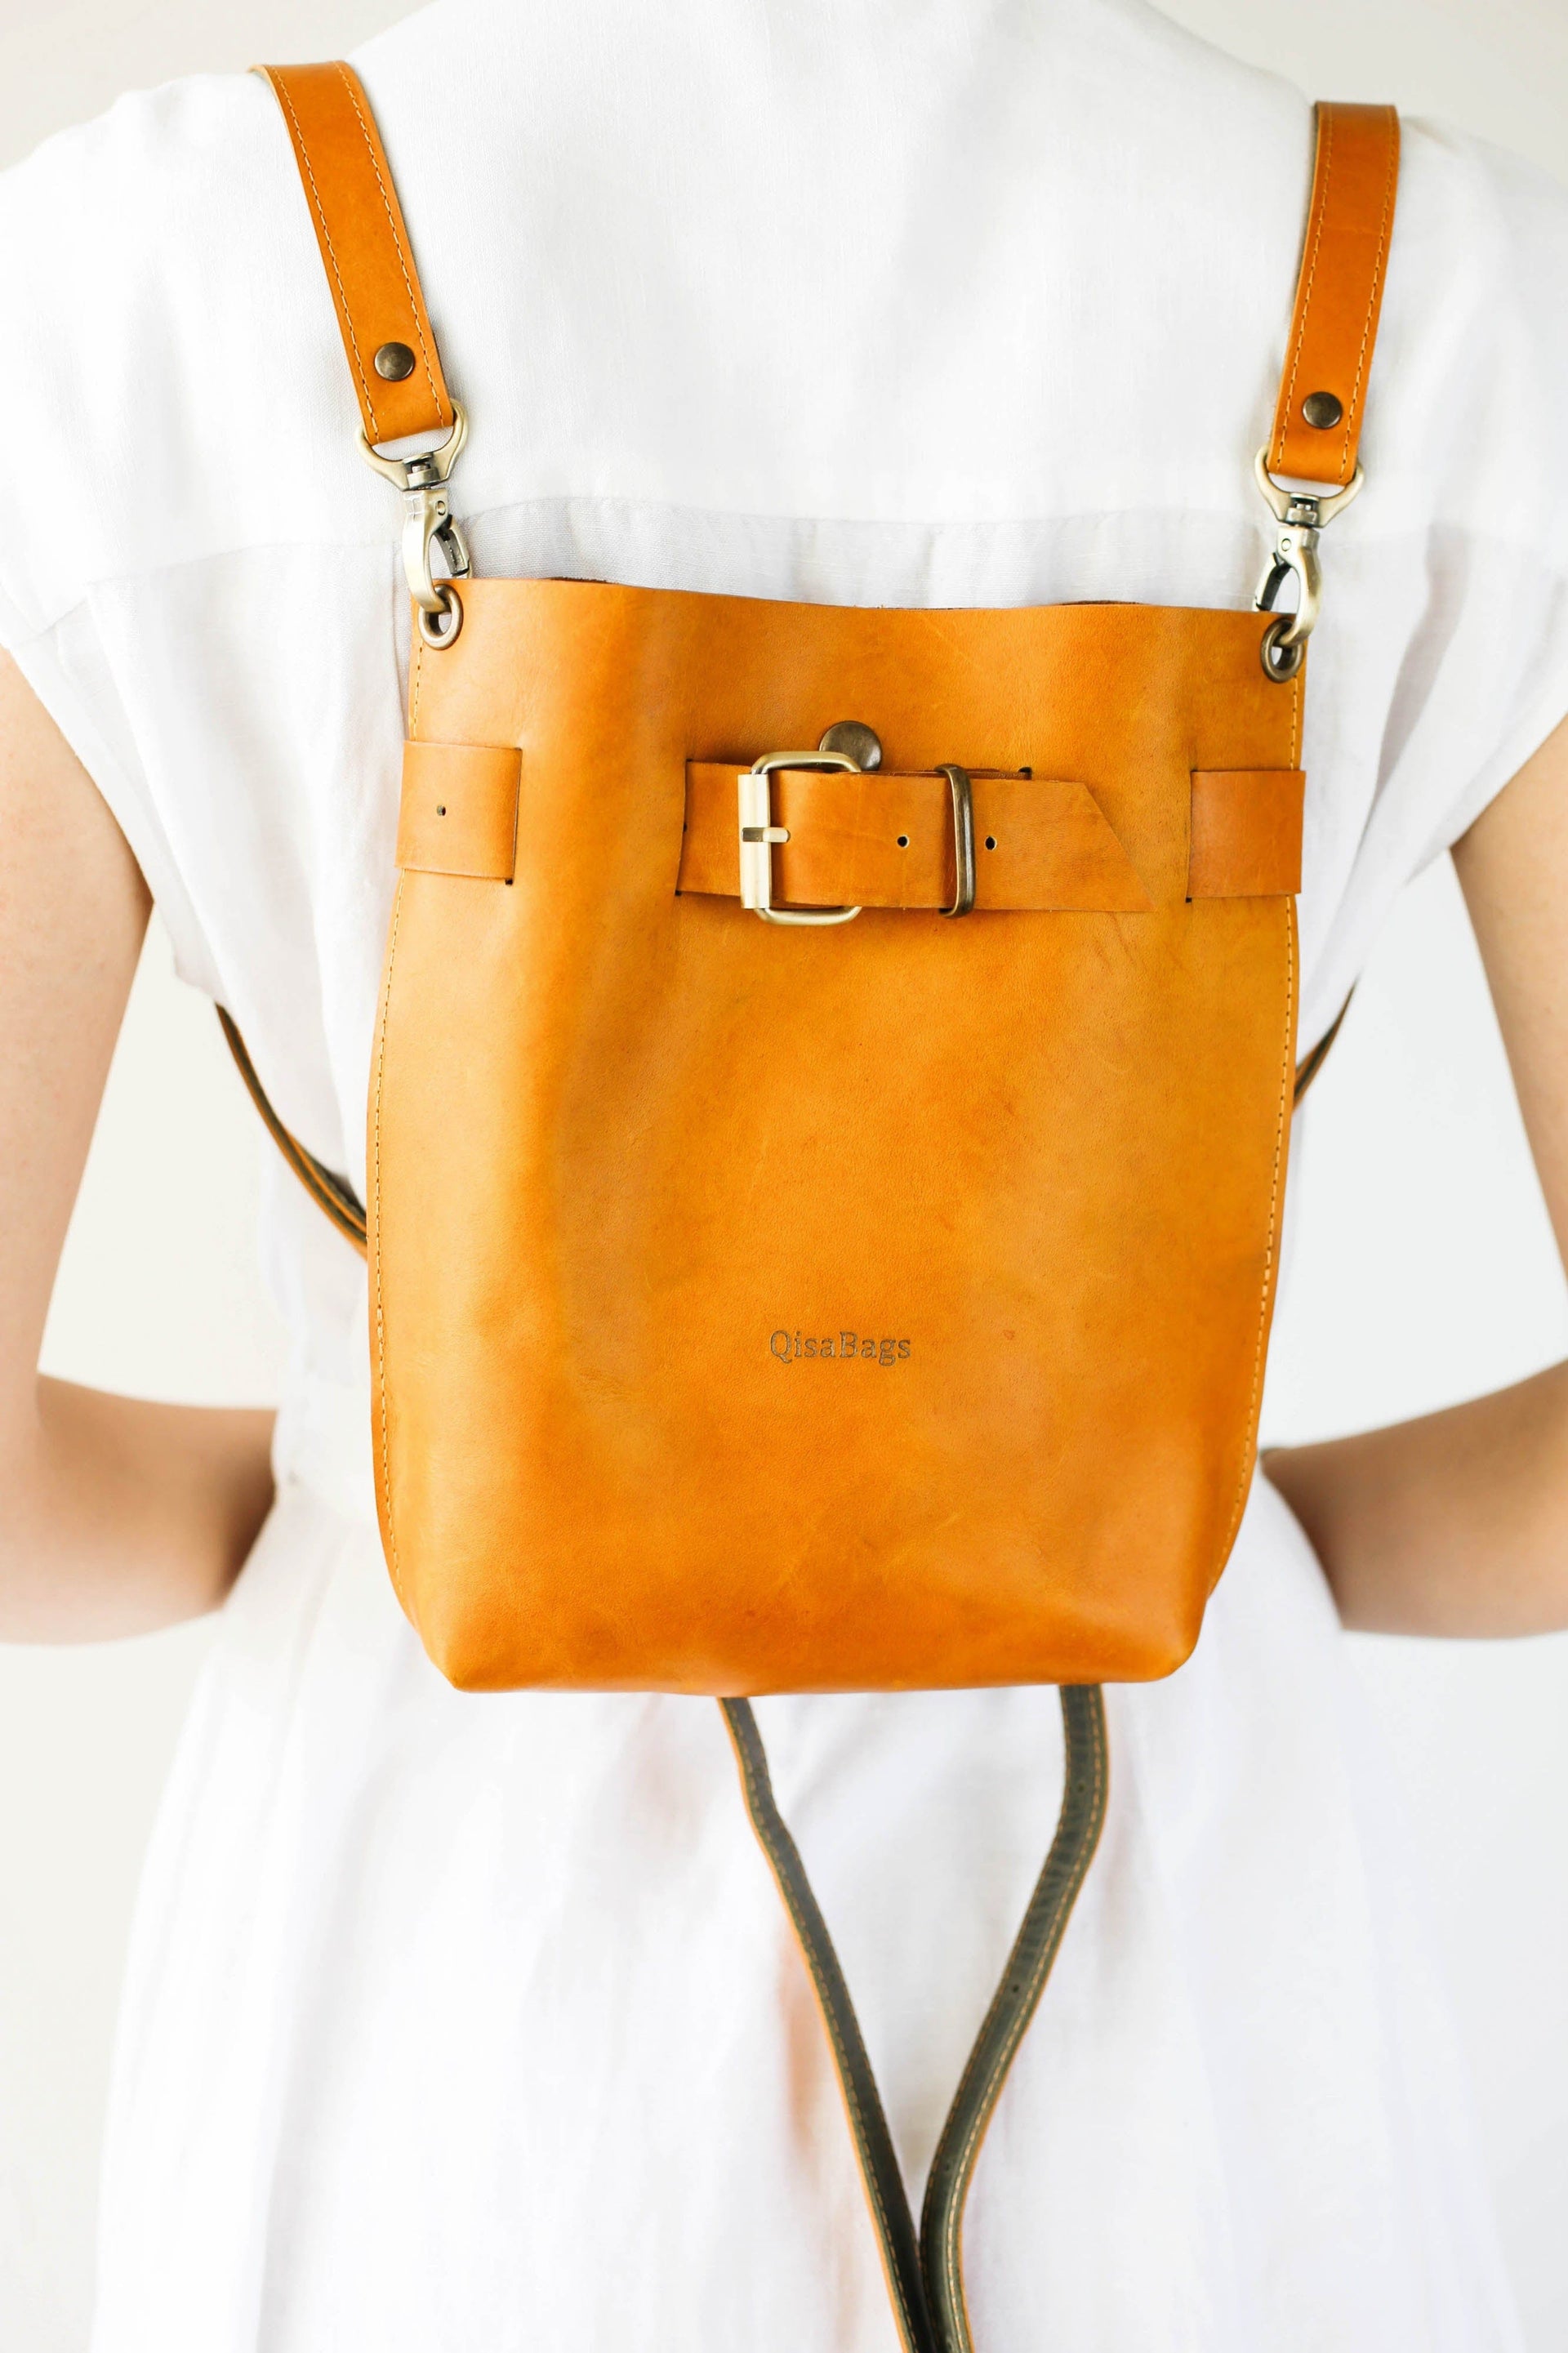 Yellow Leather Backpack